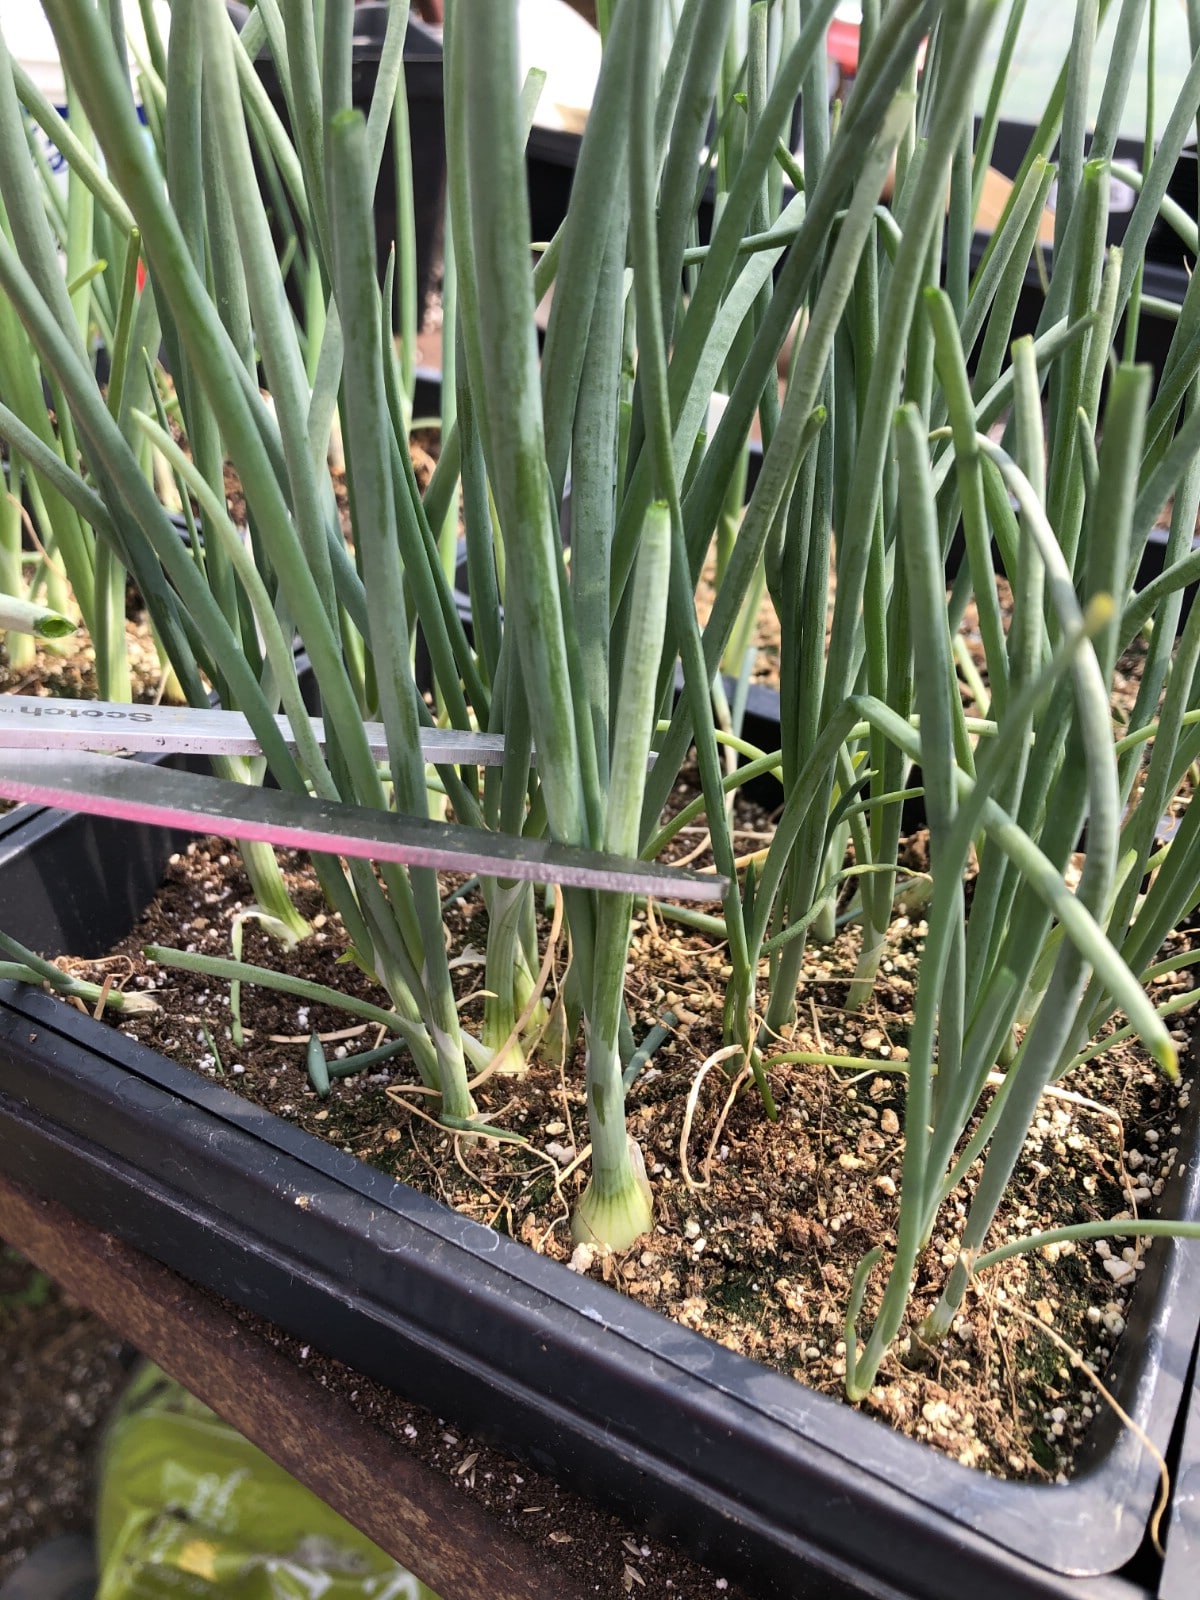 trimming onions with scissors